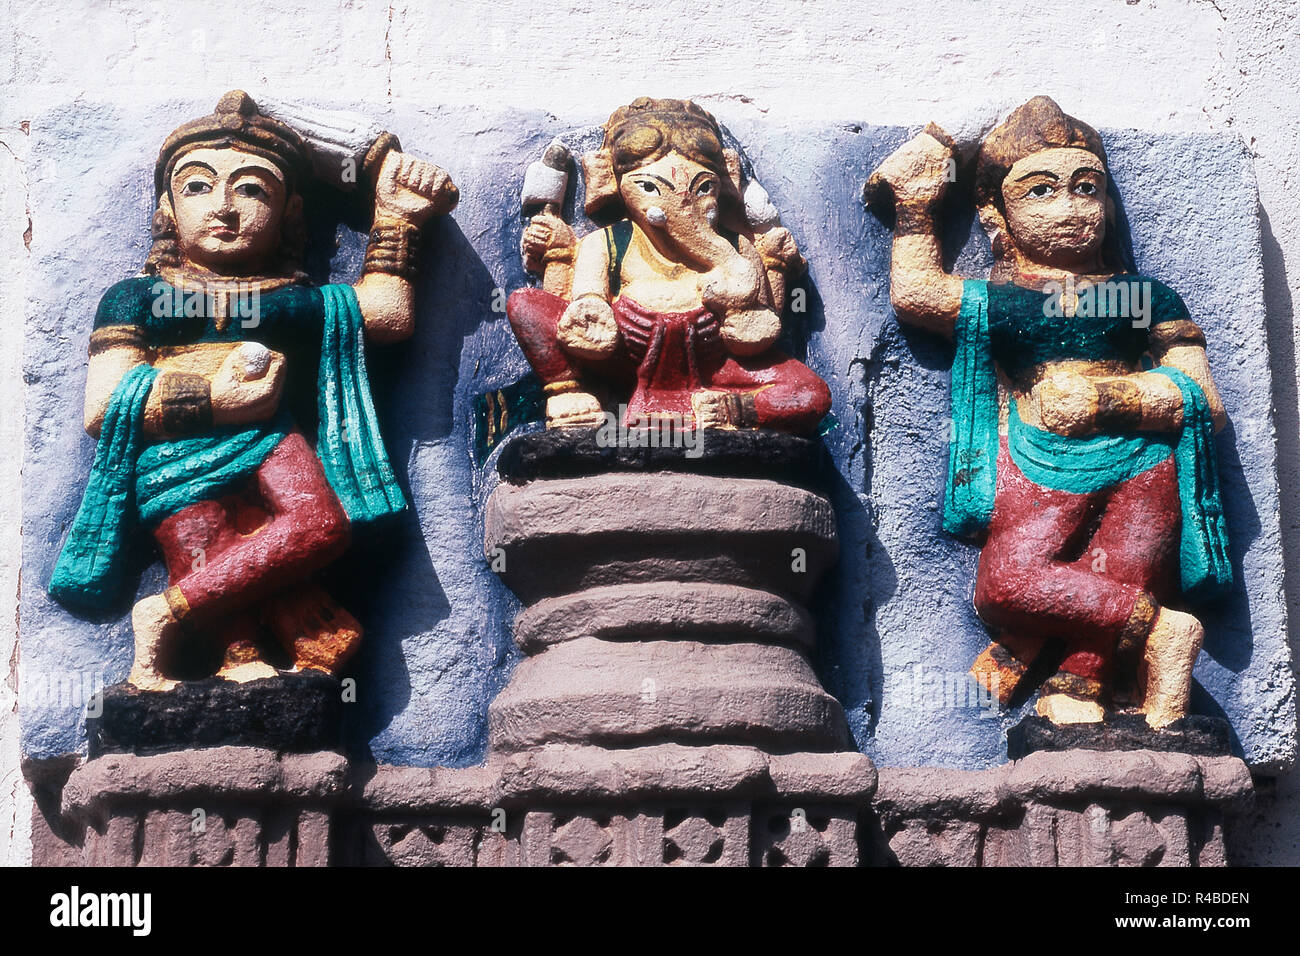 Sculpture of Lord Ganesh with wives, Sayla, Gujarat, India, Asia Stock Photo